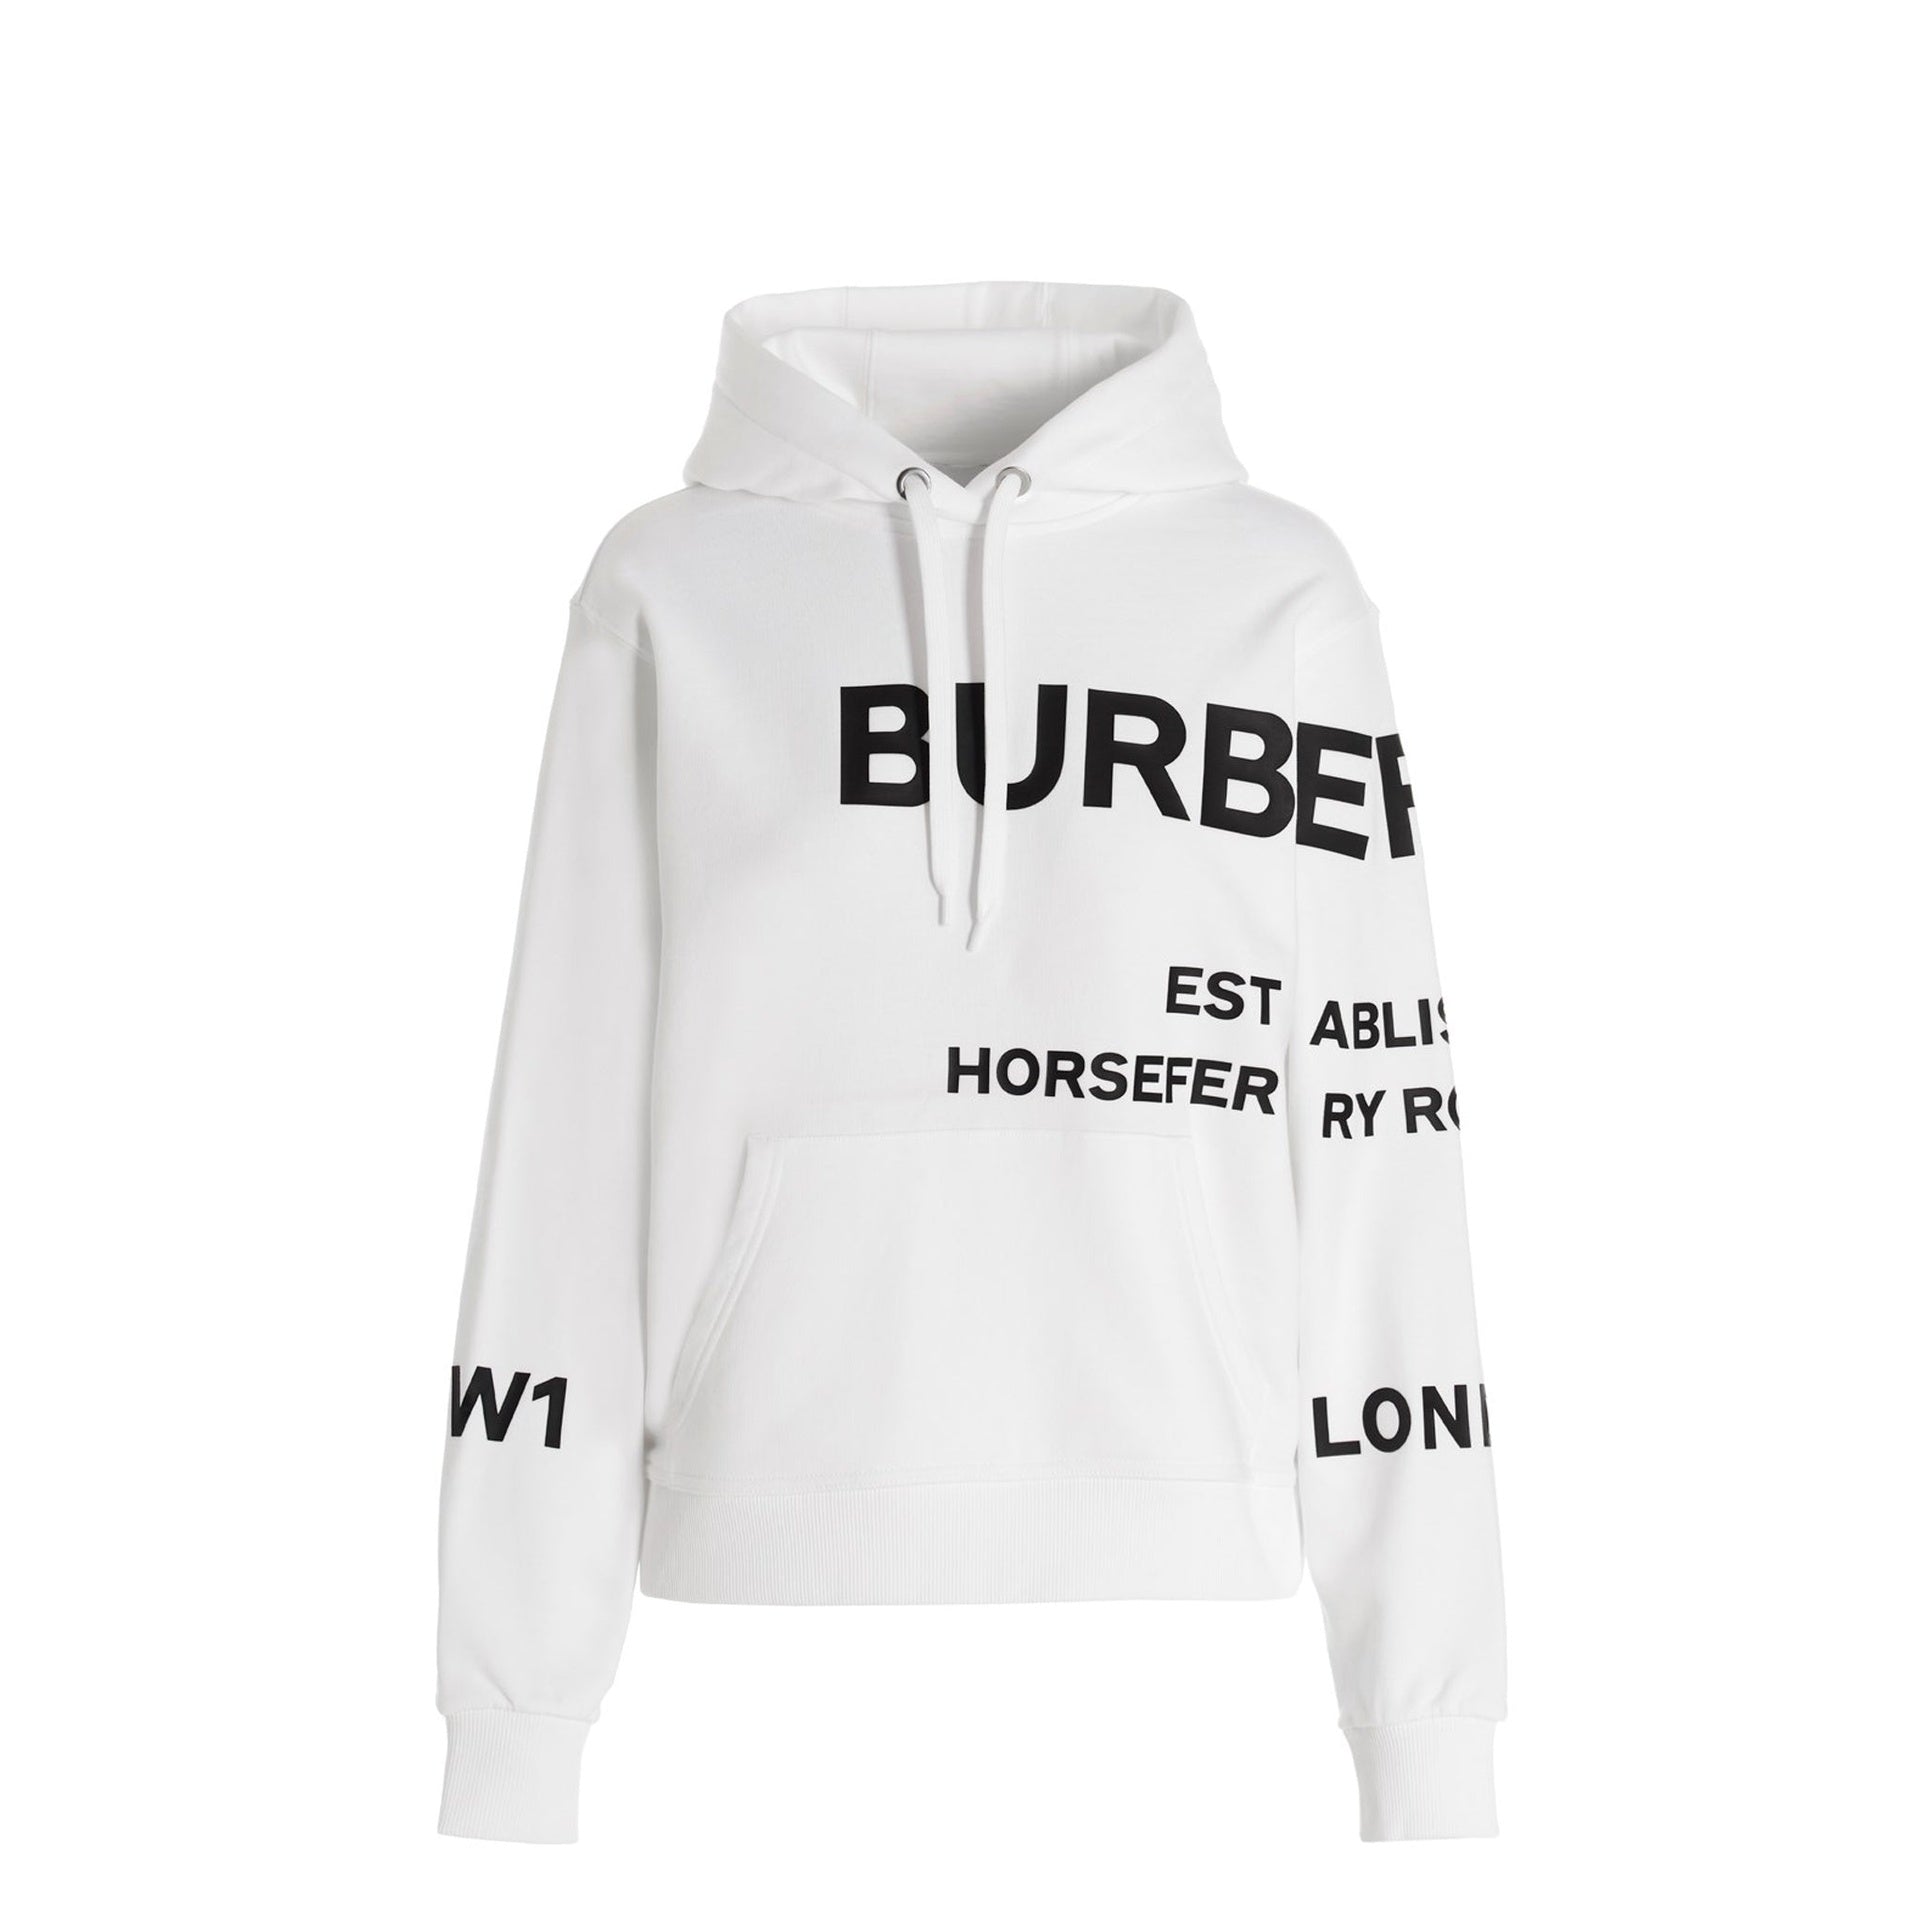 BURBERRY-OUTLET-SALE-Burberry-Logo-Hooded-Sweatshirt-Shirts-WHITE-M-ARCHIVE-COLLECTION.jpg